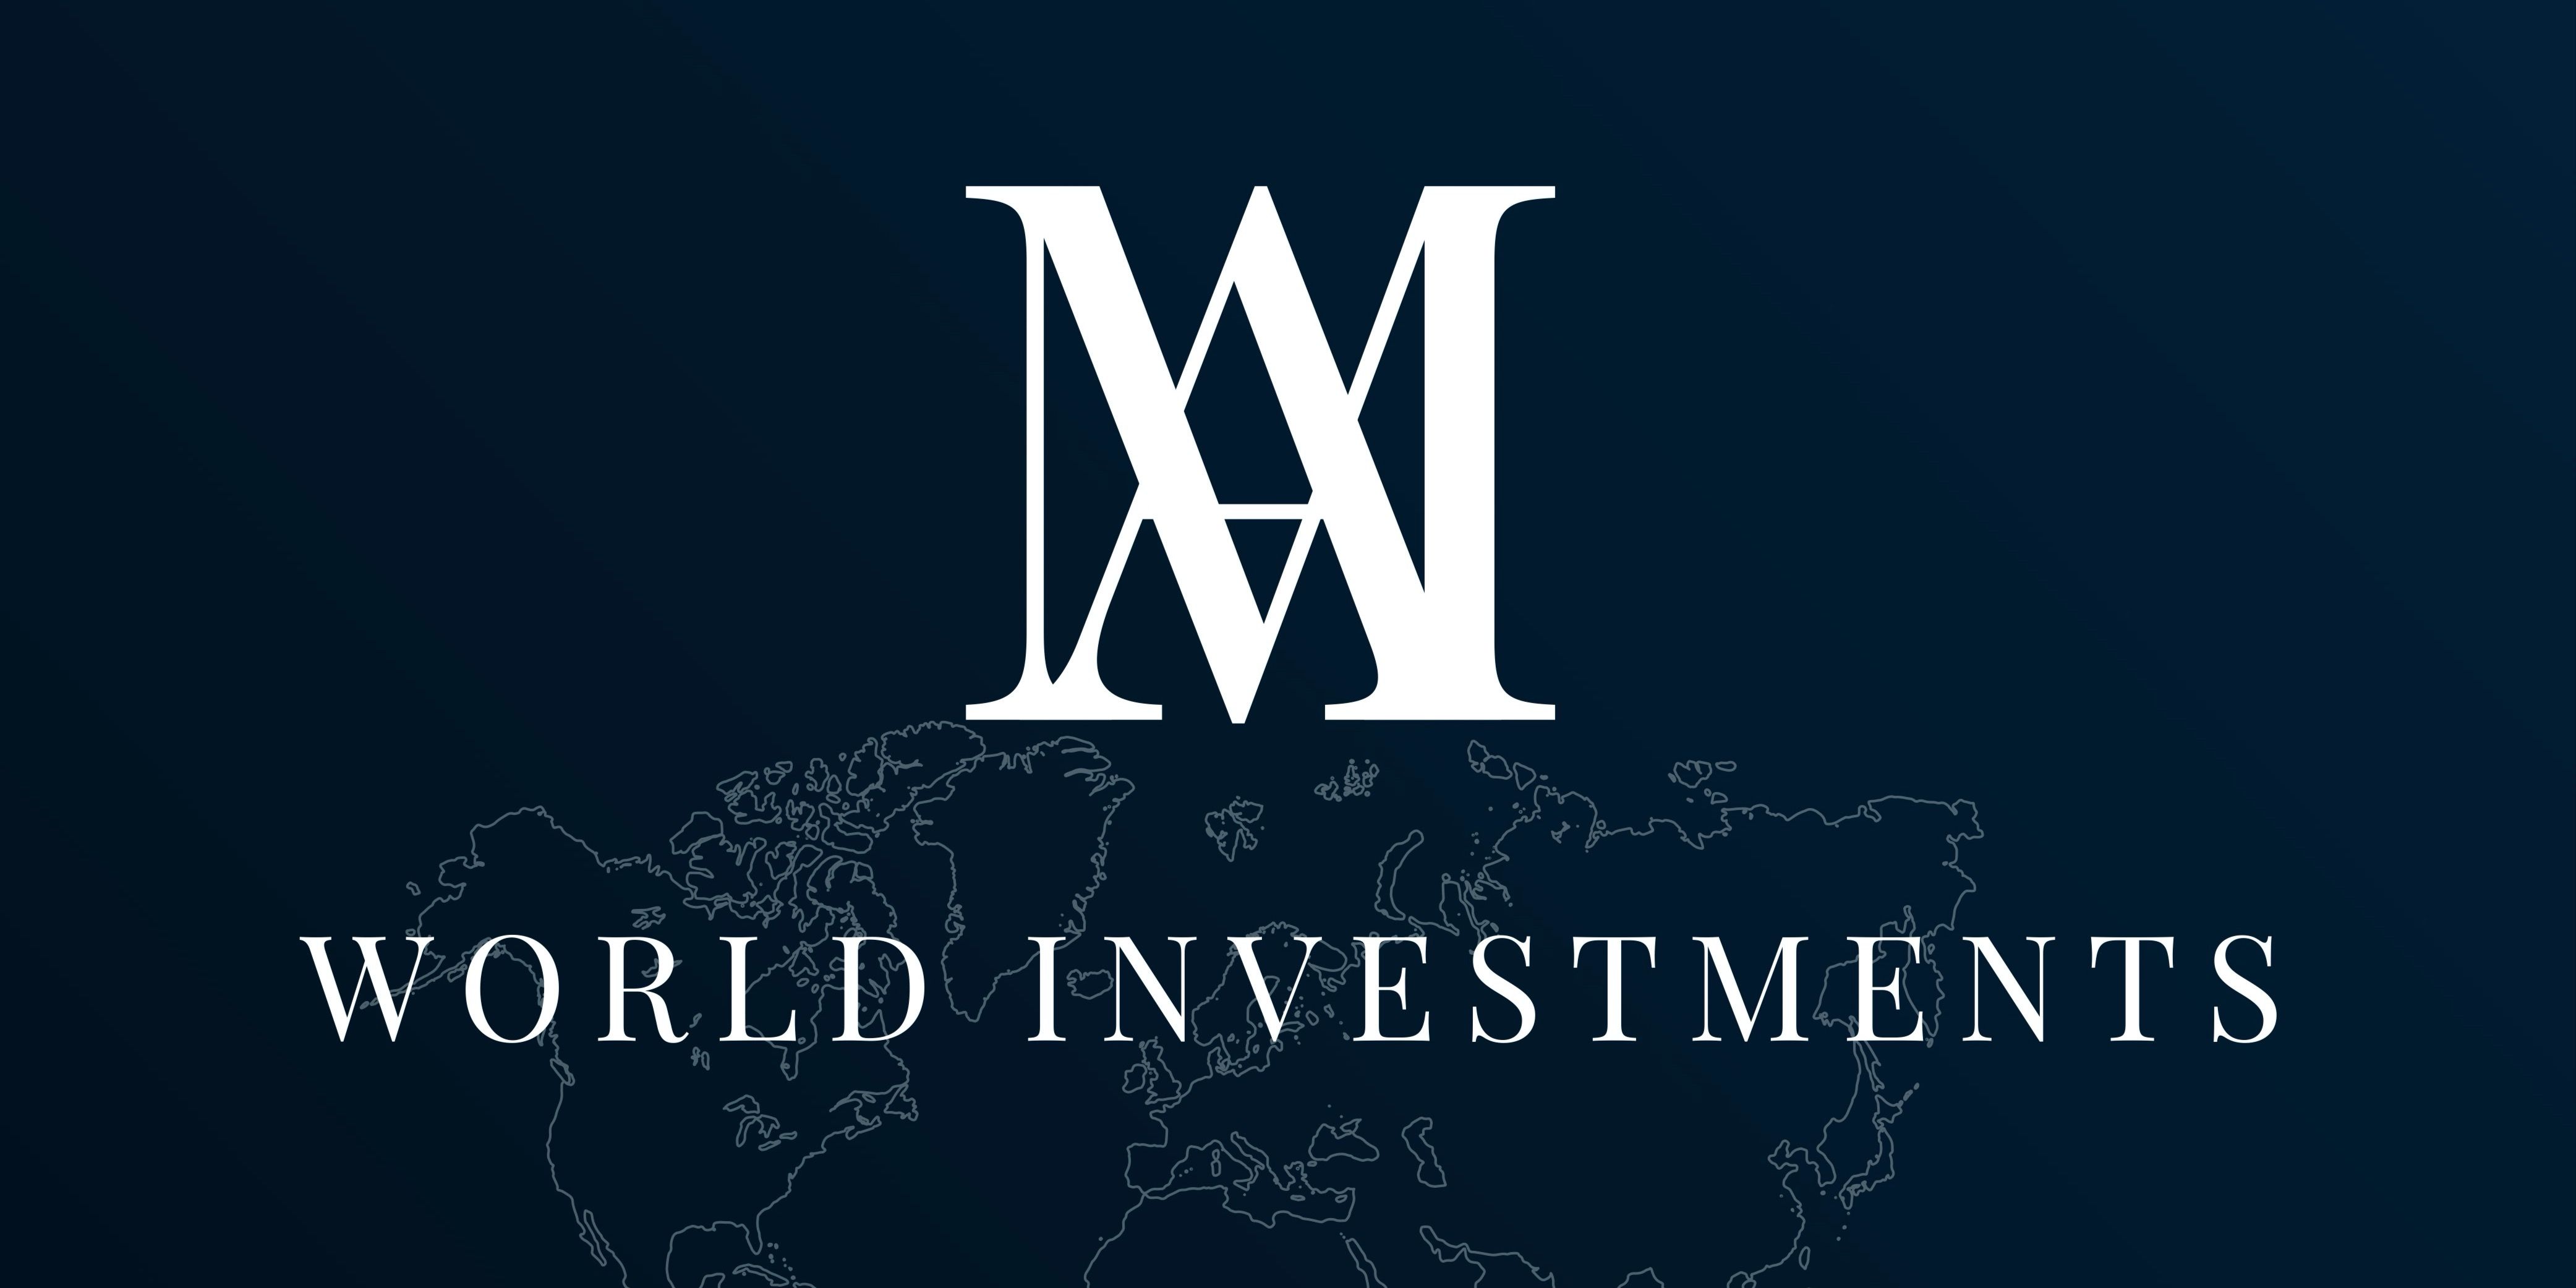 A&M World Investments